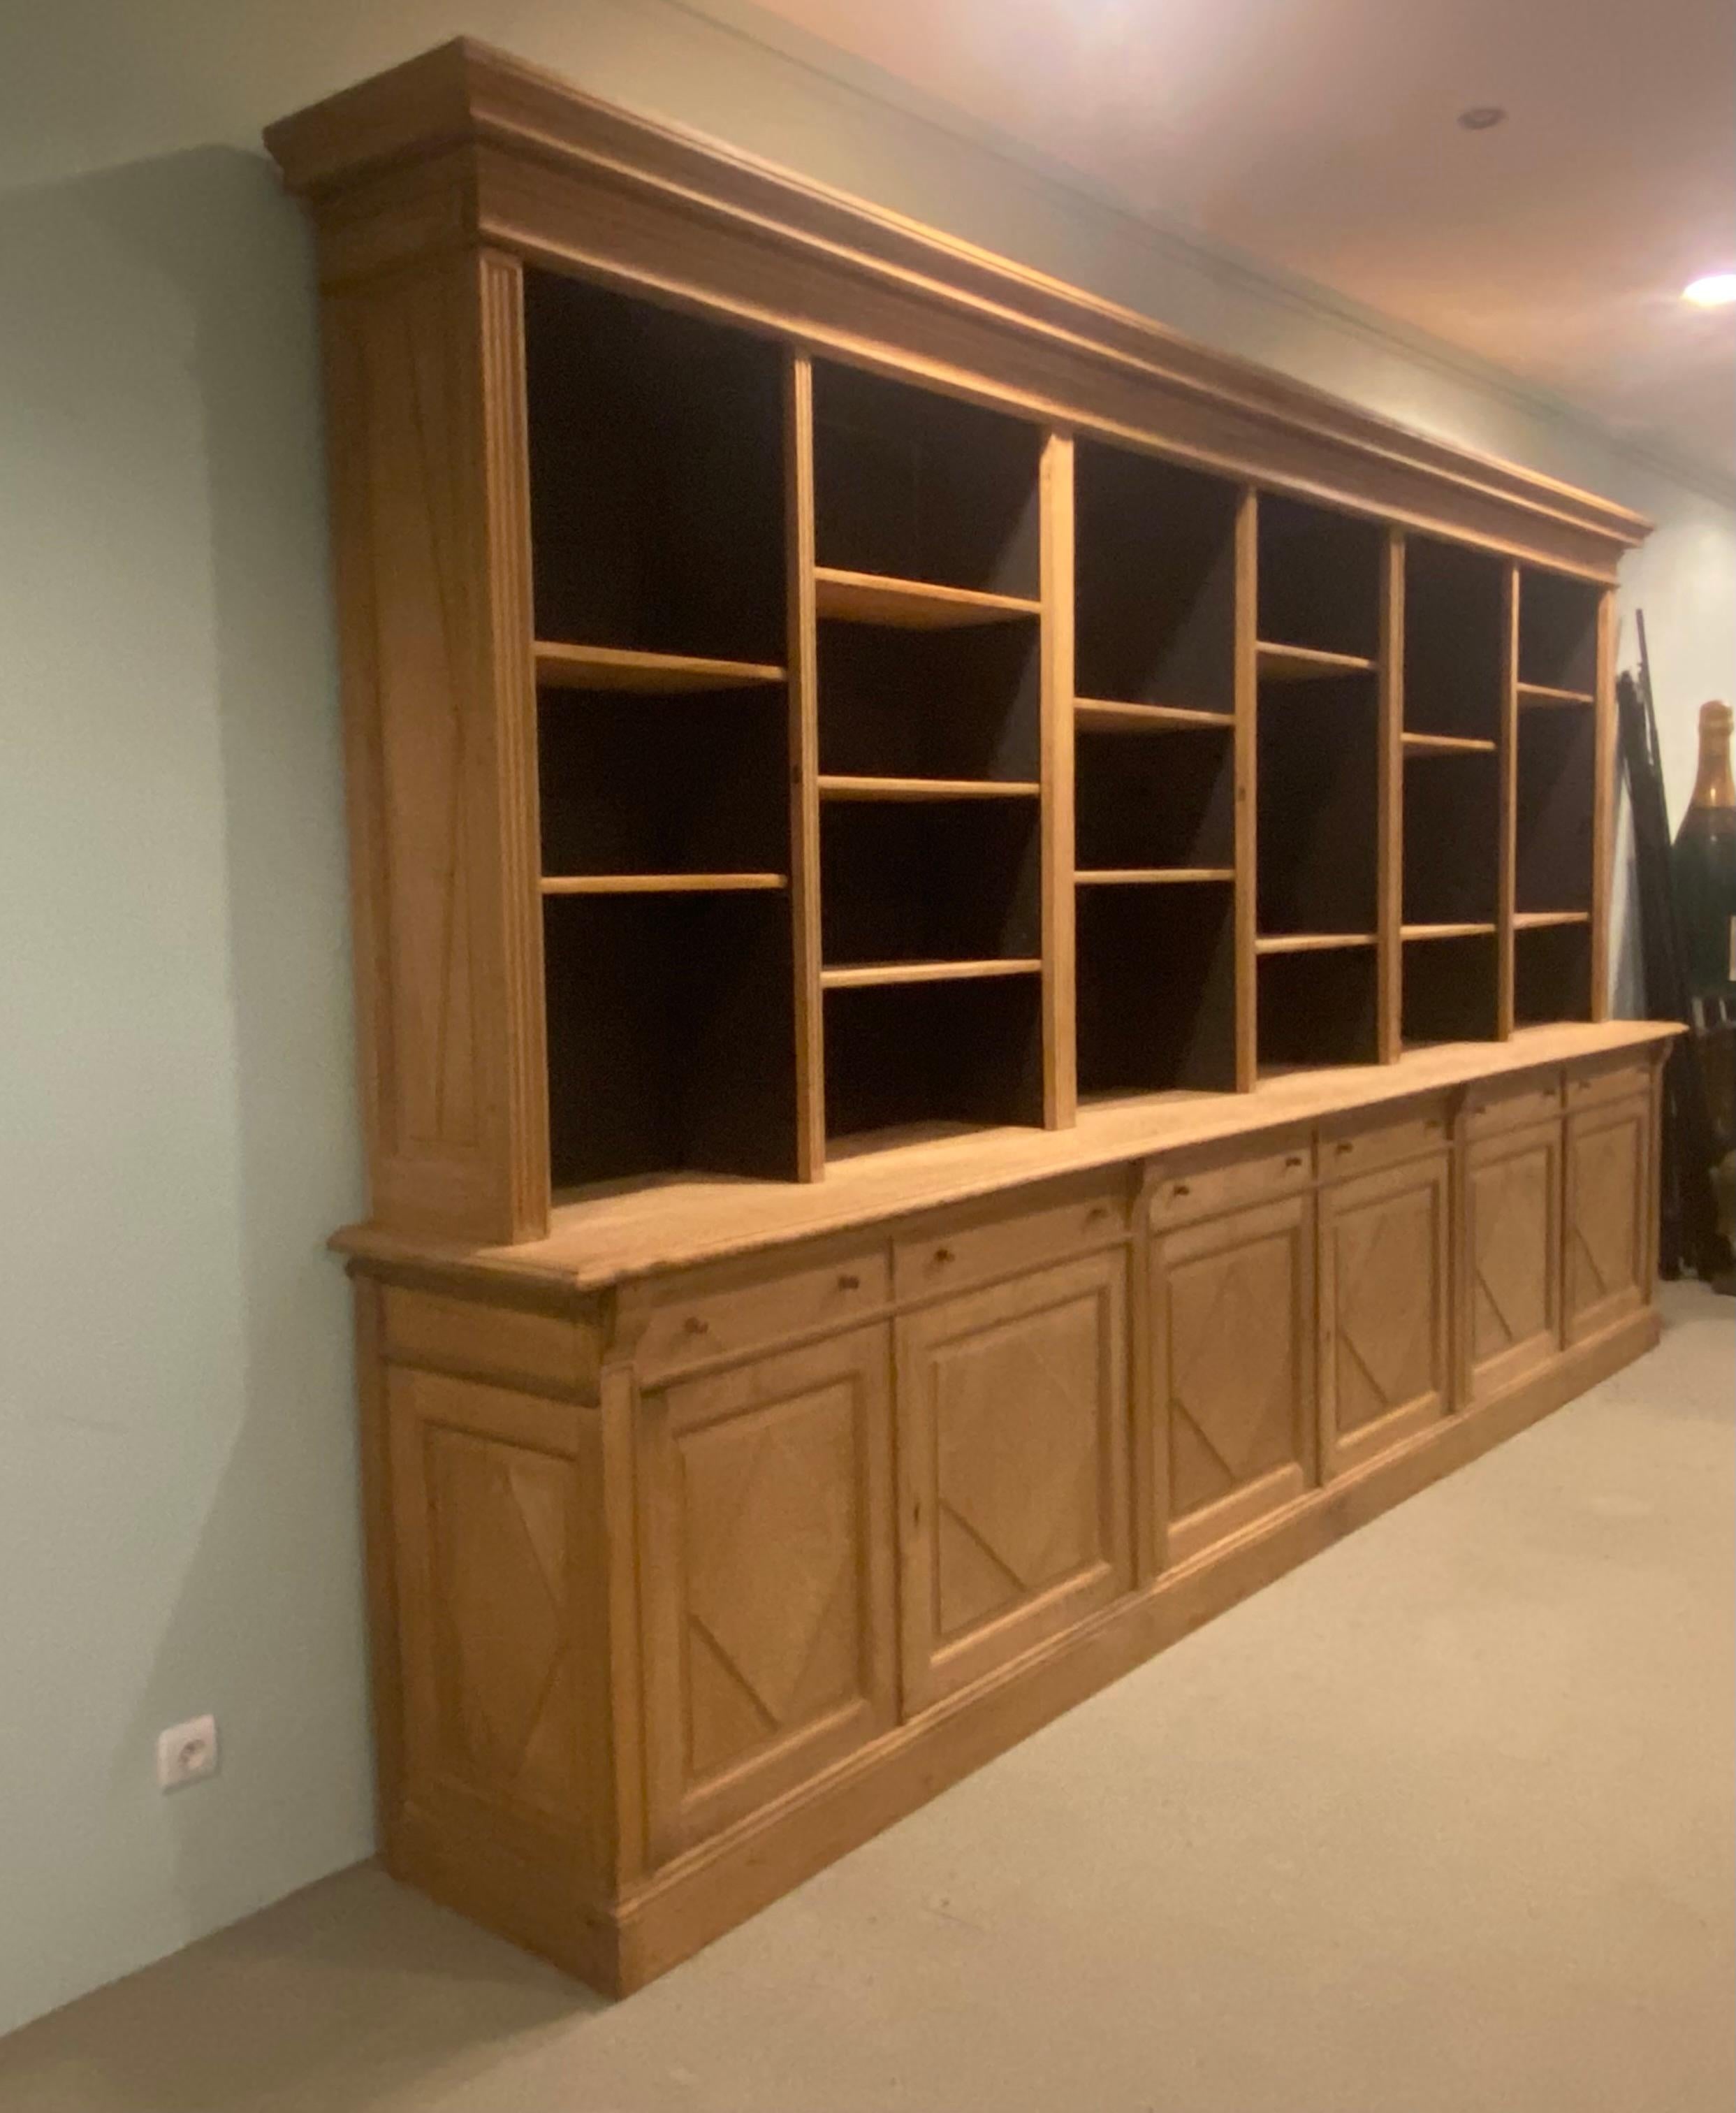 Exceptional Wide Bookcase of 413 cm wide and only 229 cm high, high quality bleached Oak Wood,

from a Notary Cabinet in the north Of France,

made to order around 1900, with glazed doors, to be used or without doors is also a beautiful